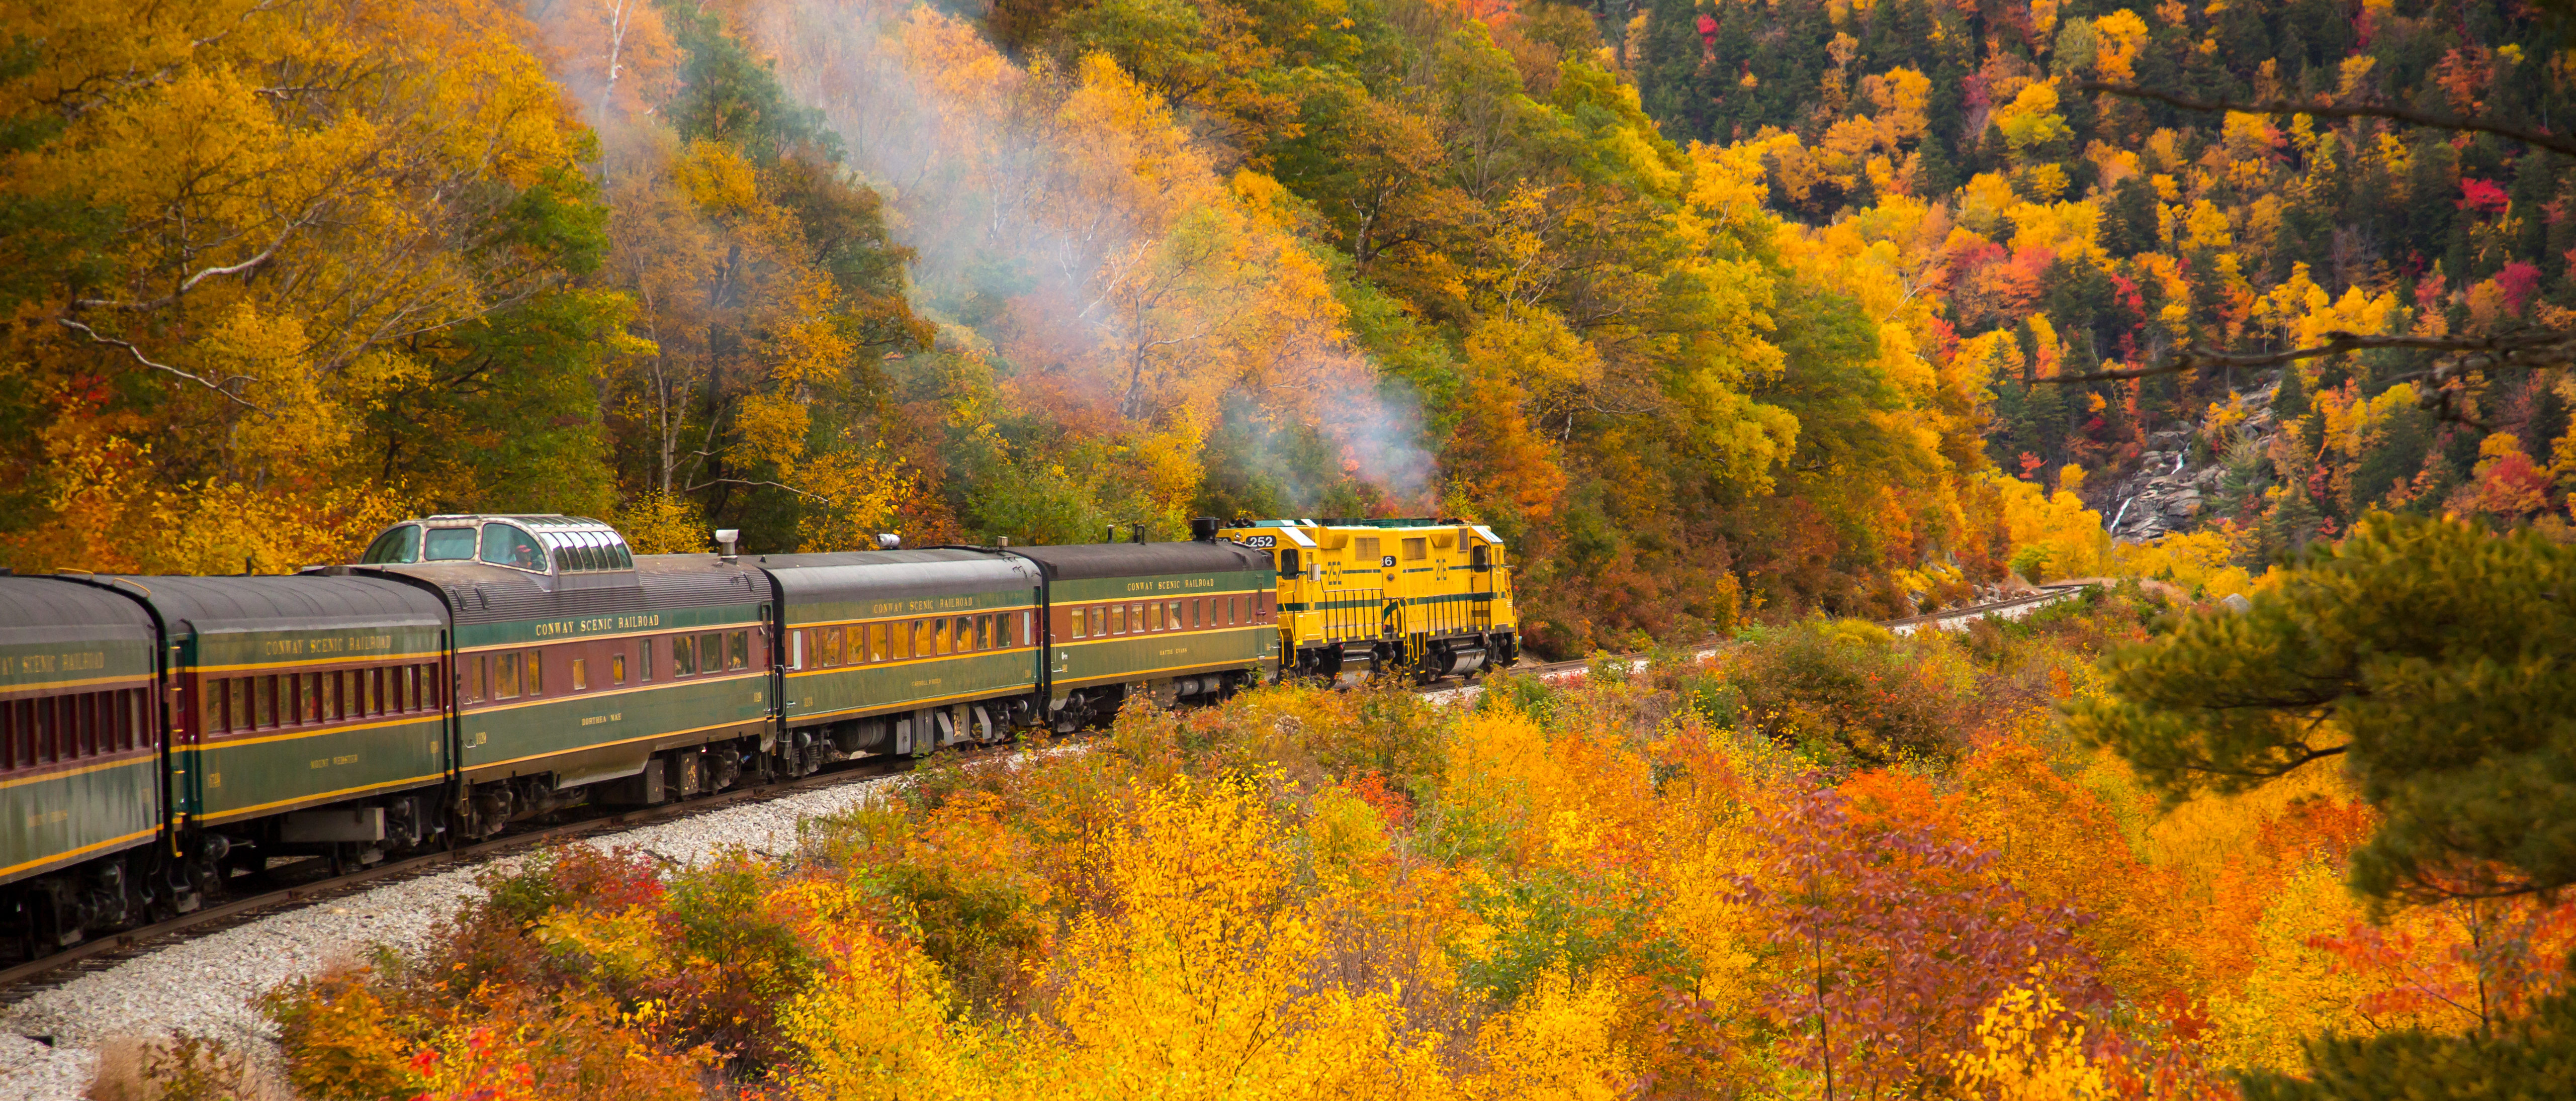 Crawford Notch, New Hampshire - 10/14/2015: The Conway Scenic Railway train just west of Bartlett. Hardwood trees are showing peak fall color in the White Mountain National Forest. - Image